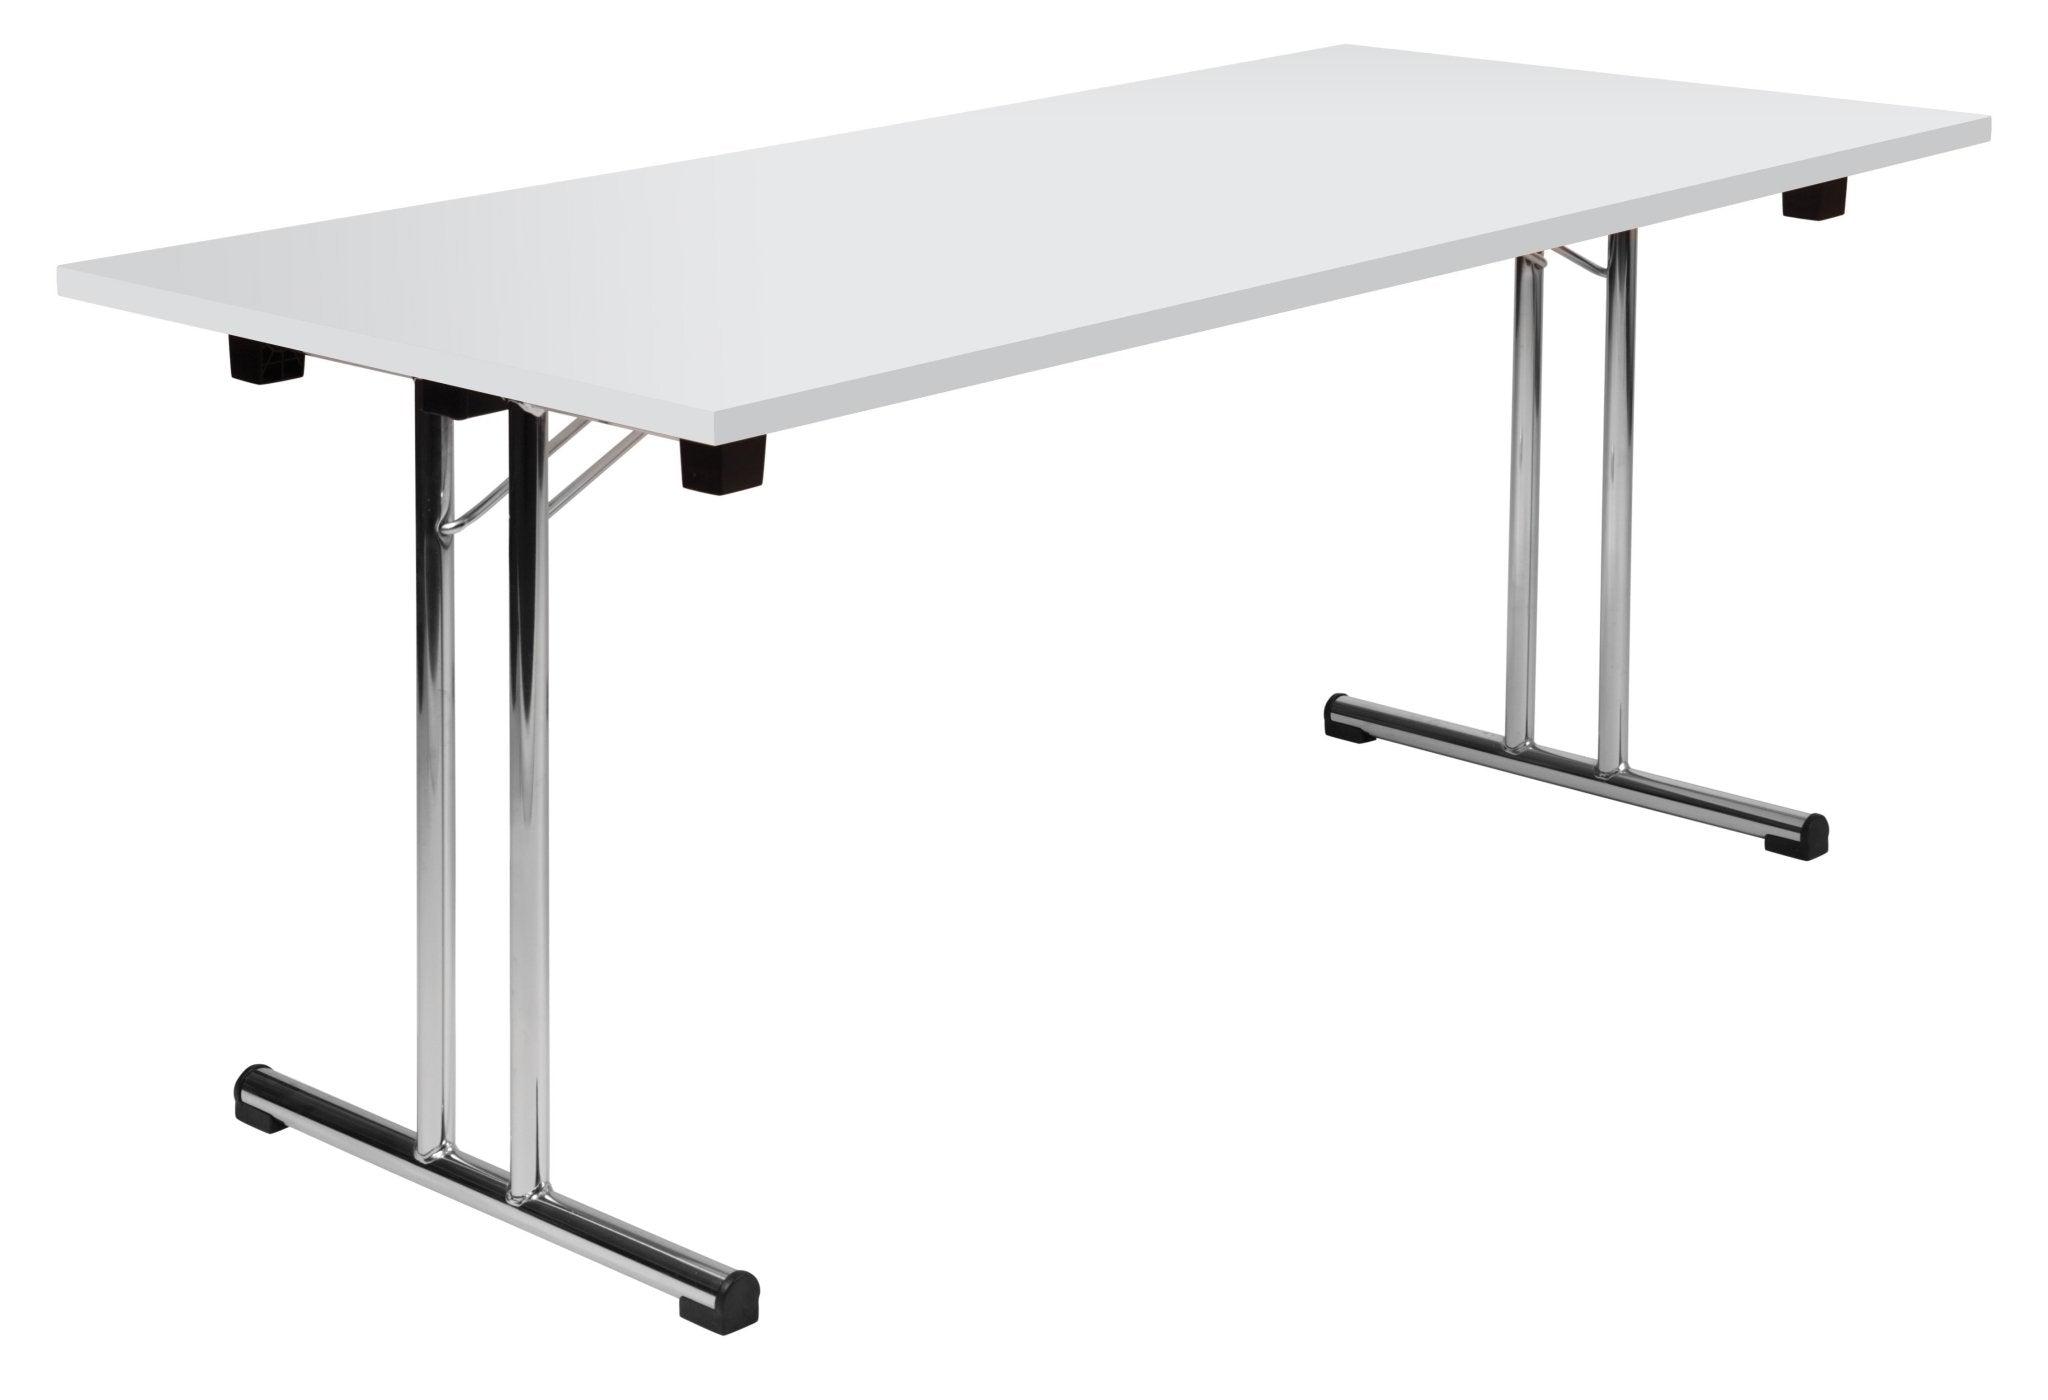 Space folding table (white) - image 1